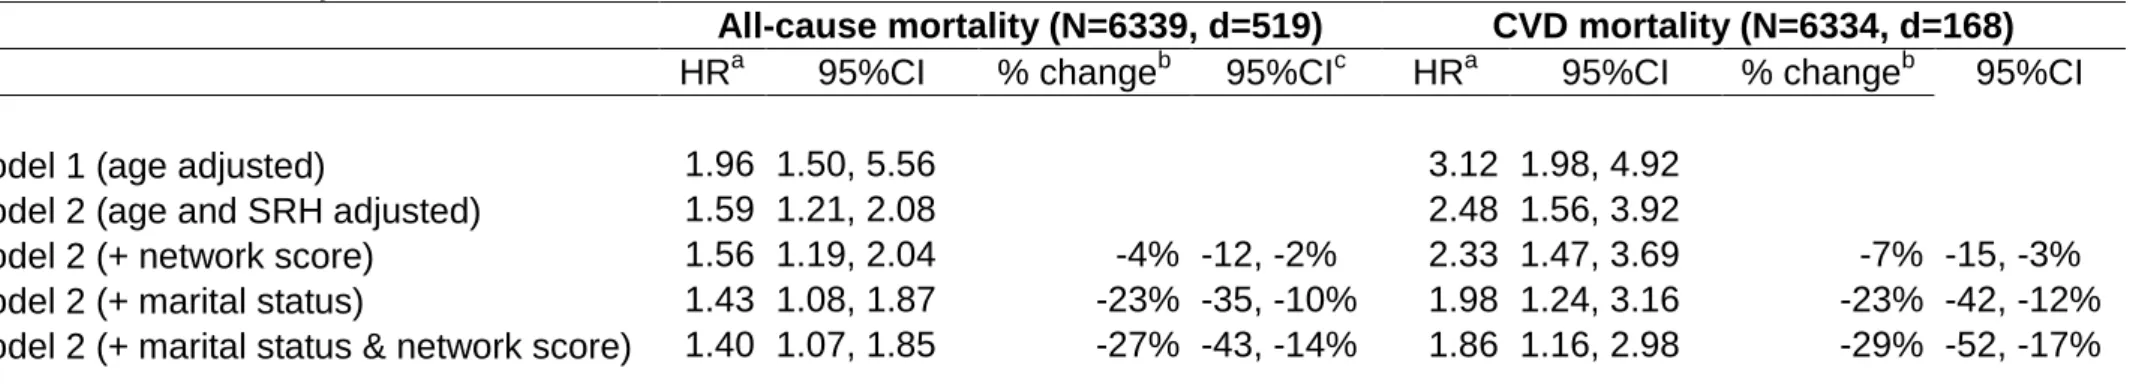 Table 4. The Role of Measures of Social Support in Explaining the Association Between Occupational Position and Mortality in Men  of the Whitehall II Study, 1985 - 2009